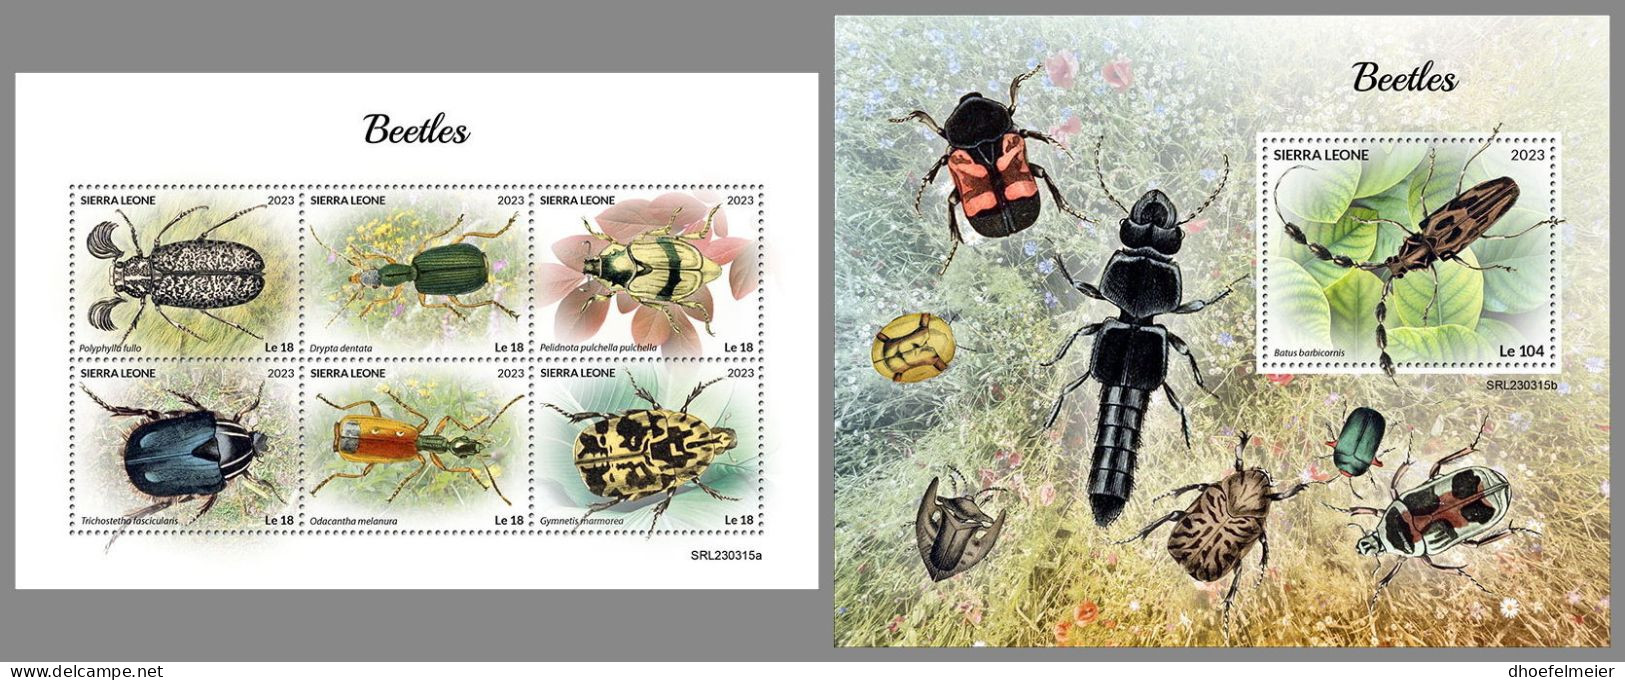 SIERRA LEONE 2023 MNH Beetles Käfer M/S+S/S – OFFICIAL ISSUE – DHQ2418 - Beetles